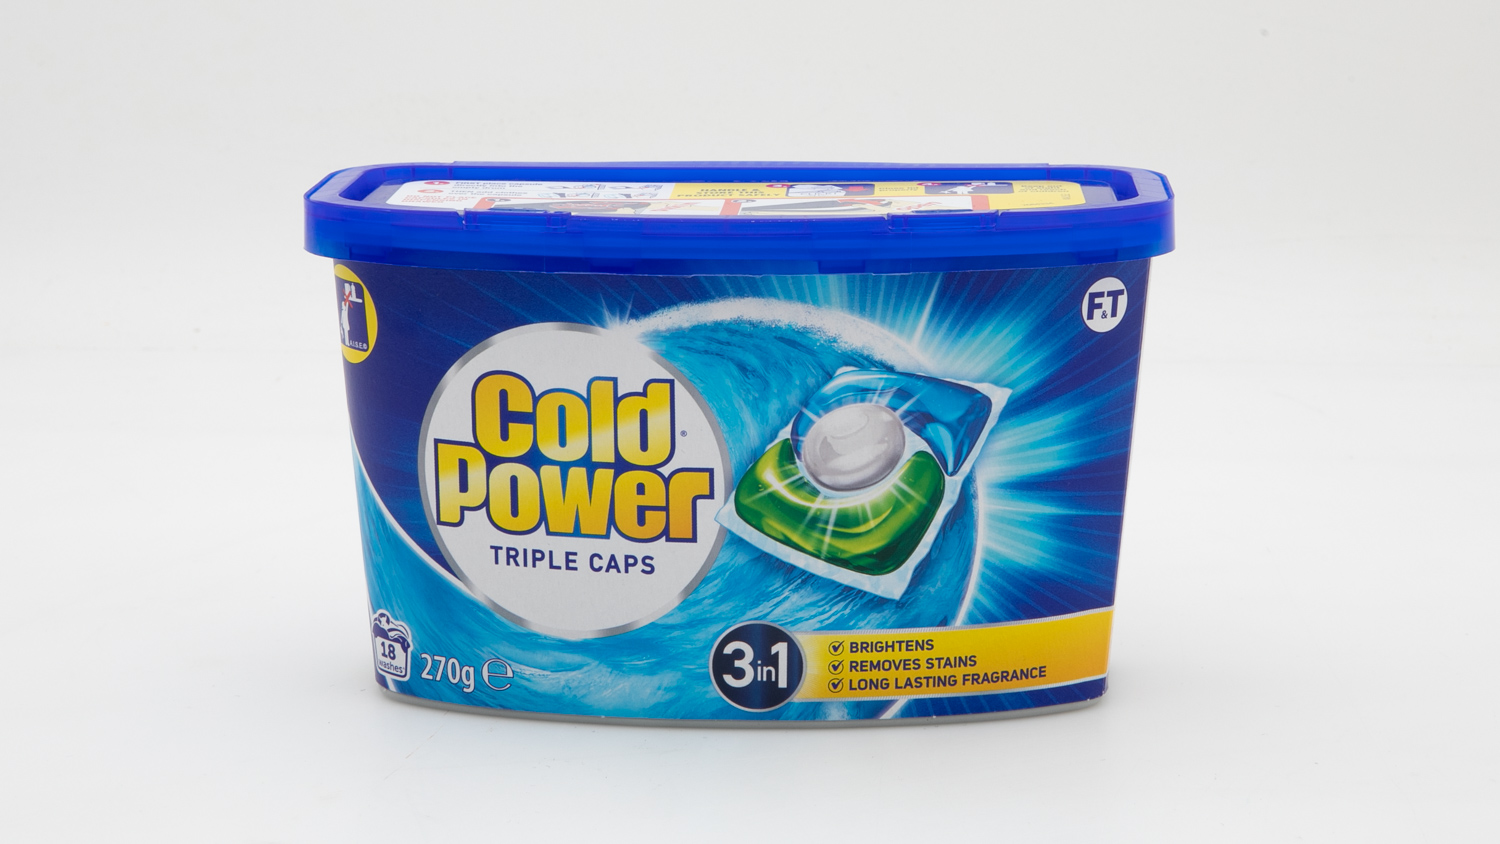 Cold Power Triple Caps 3 in 1 270g 18 capsules Top Loader carousel image